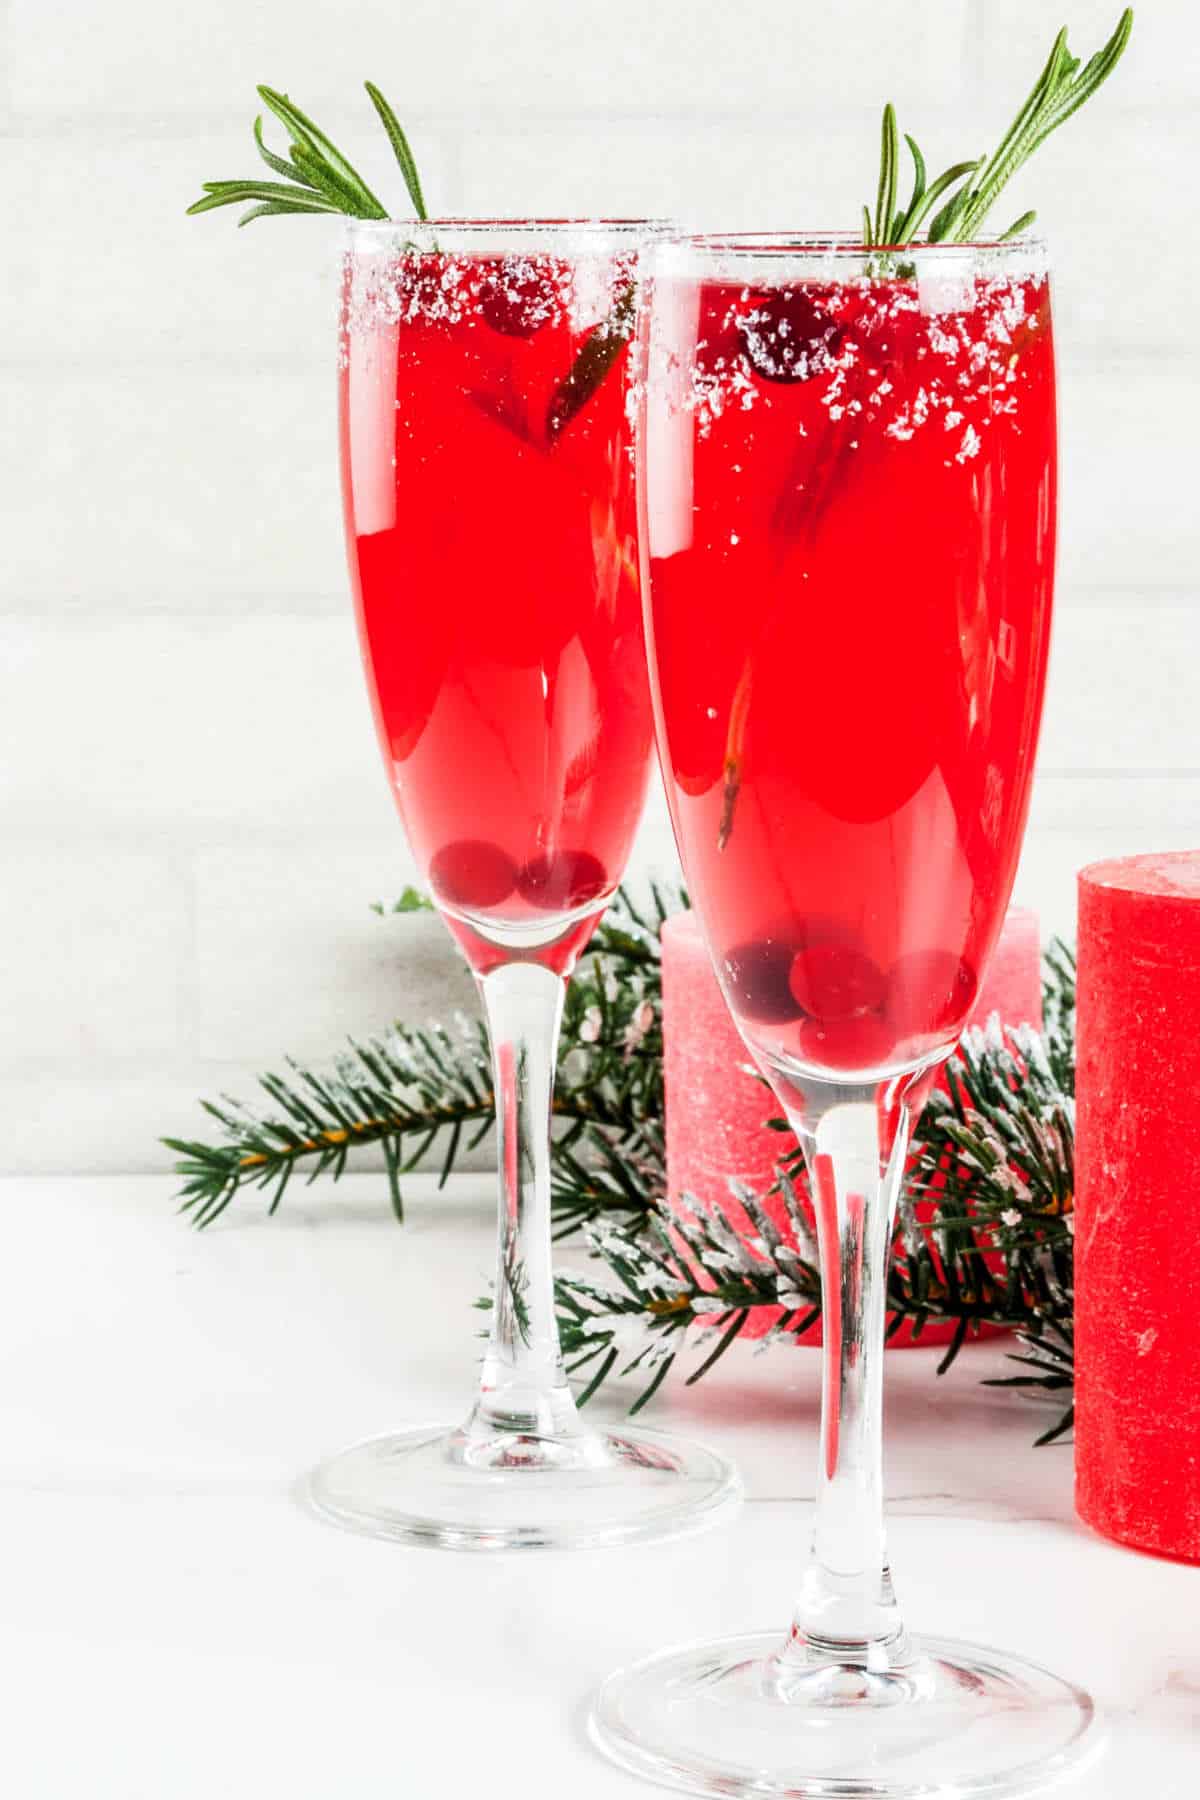 juice and sparkling wine, garnished with a rosemary sprig and cranberries.